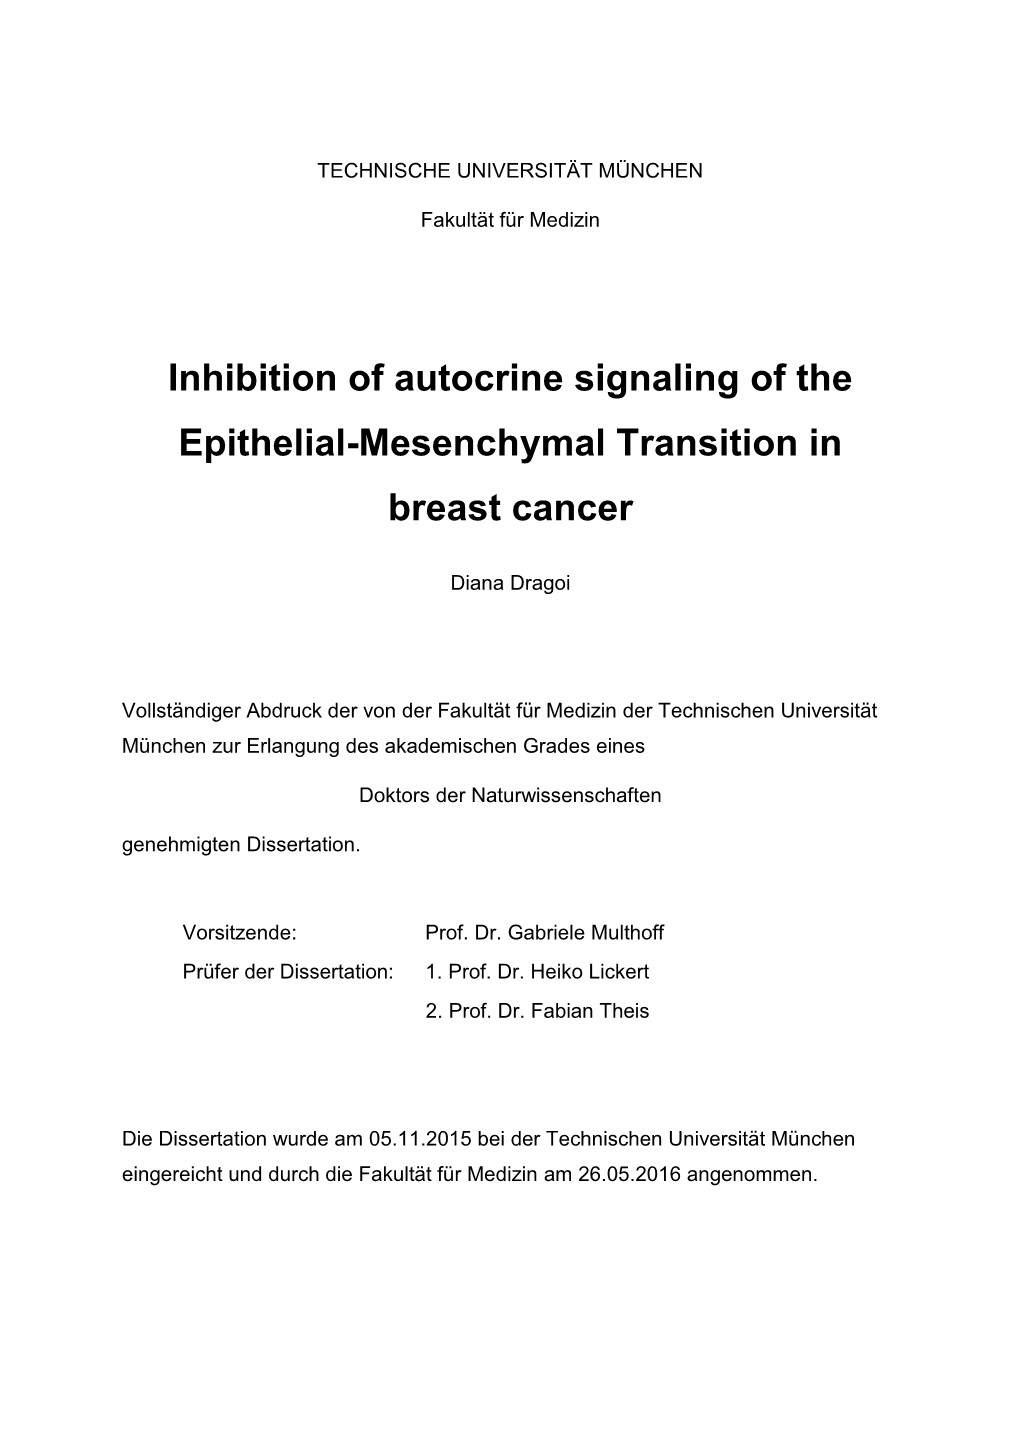 Inhibition of Autocrine Signaling of the Epithelial-Mesenchymal Transition in Breast Cancer